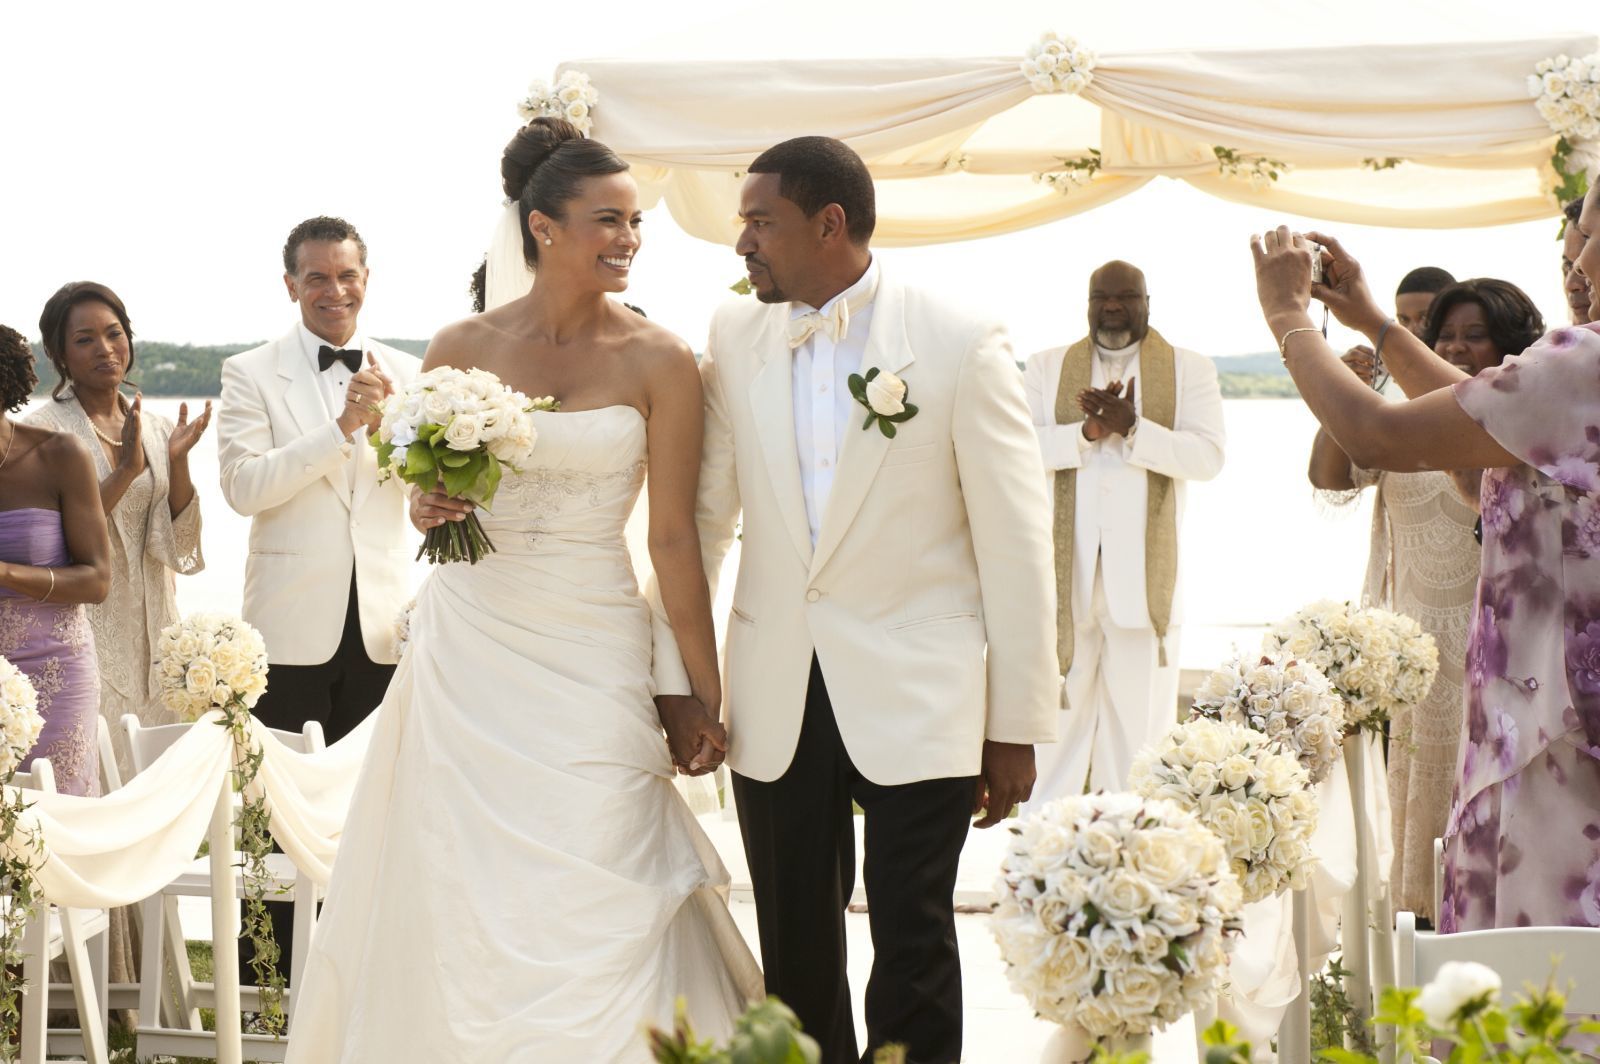 6. Jumping the Broom